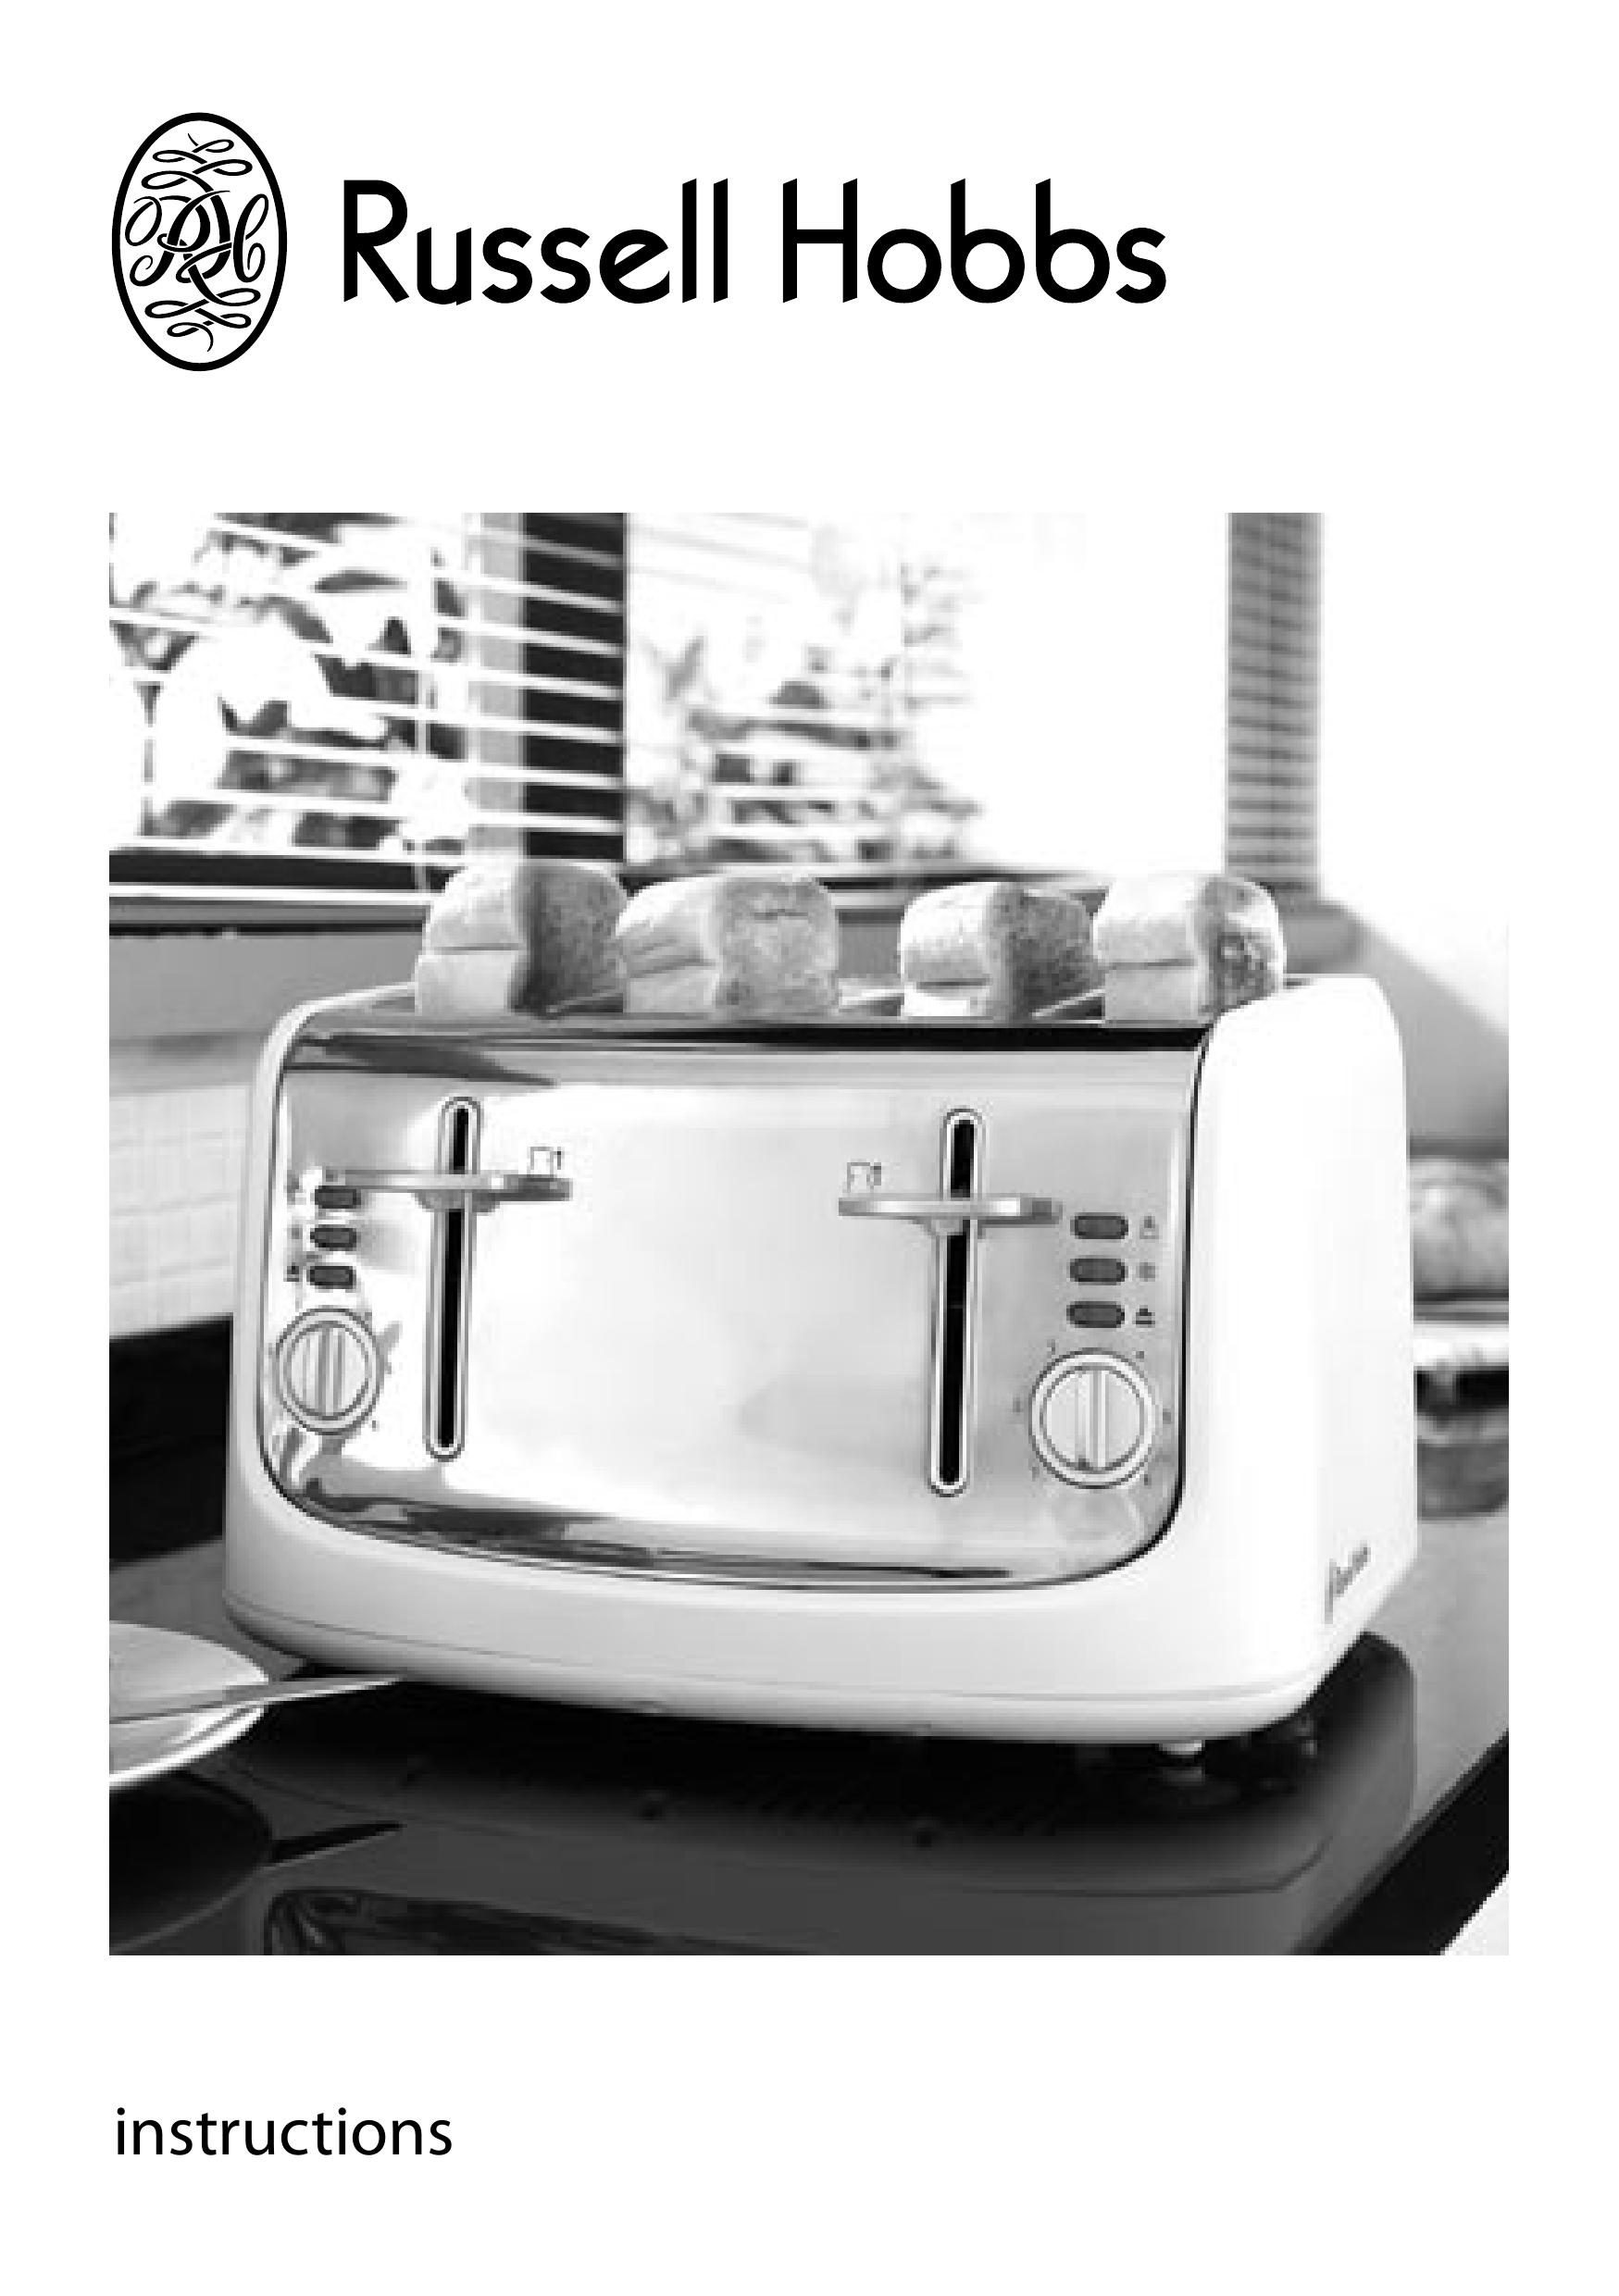 Russell Hobbs 643-114 Toaster User Manual